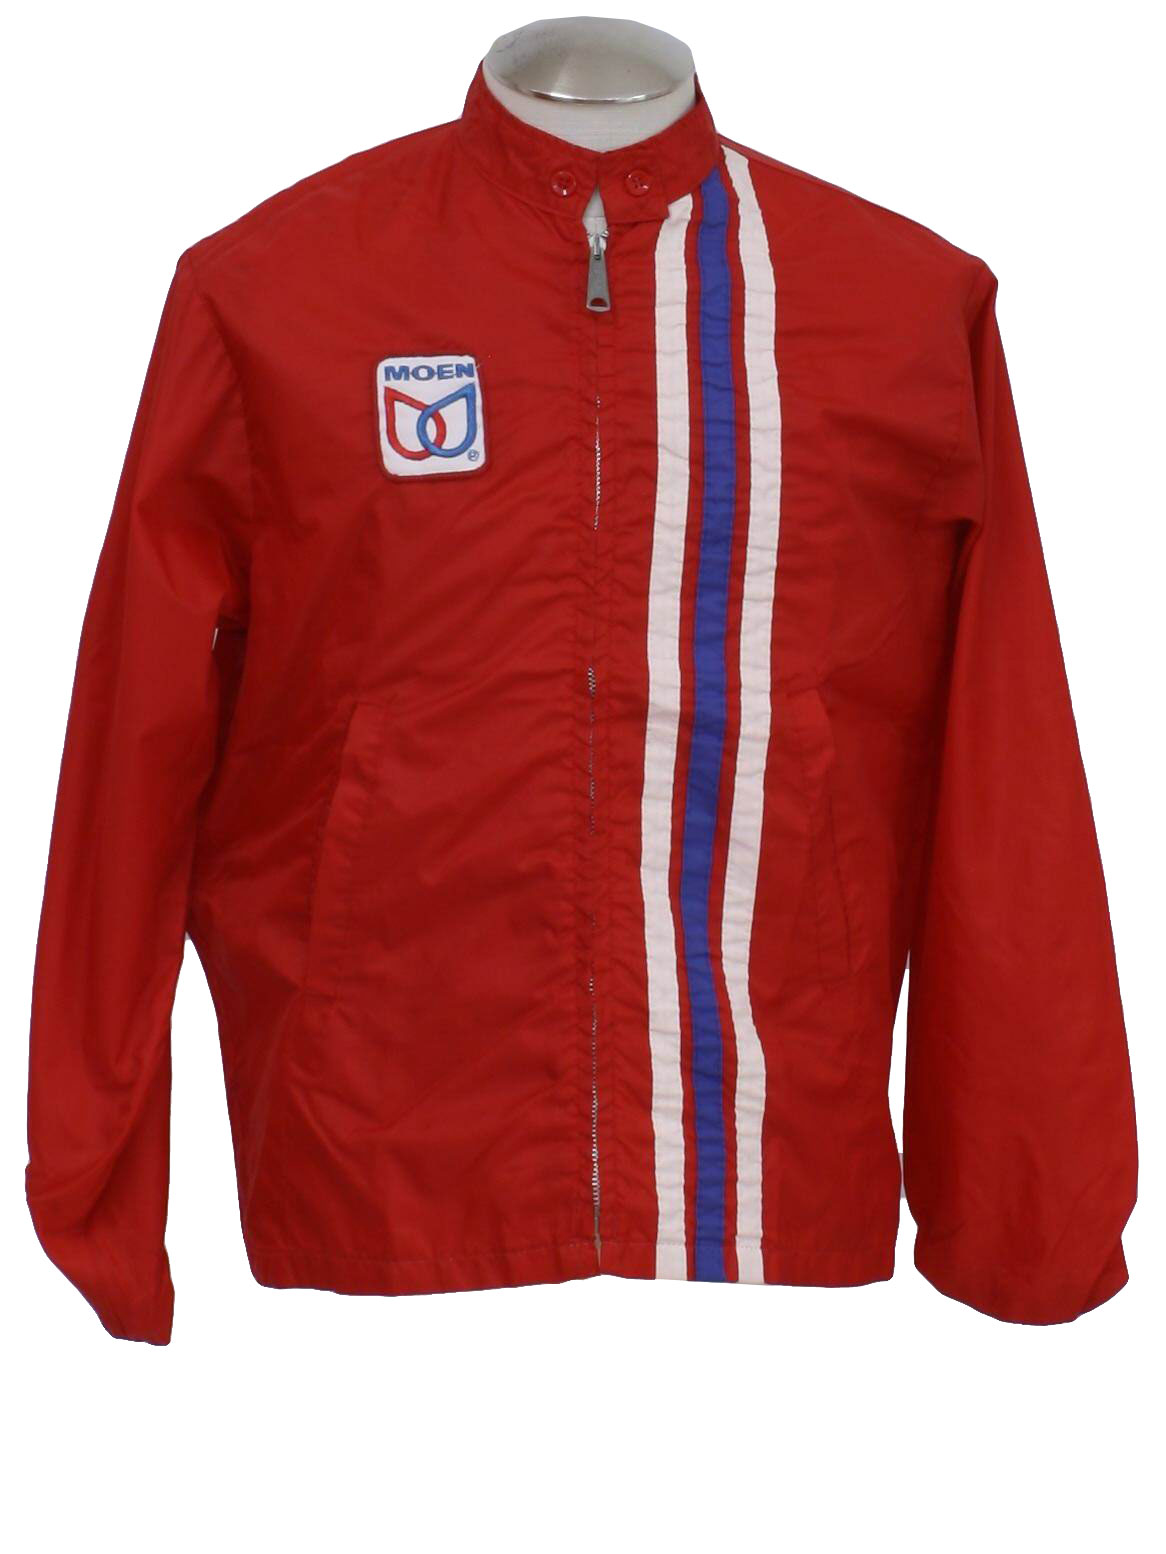 Louisville 1960s Vintage Jacket: 60s -Louisville- Mens red, white and ...